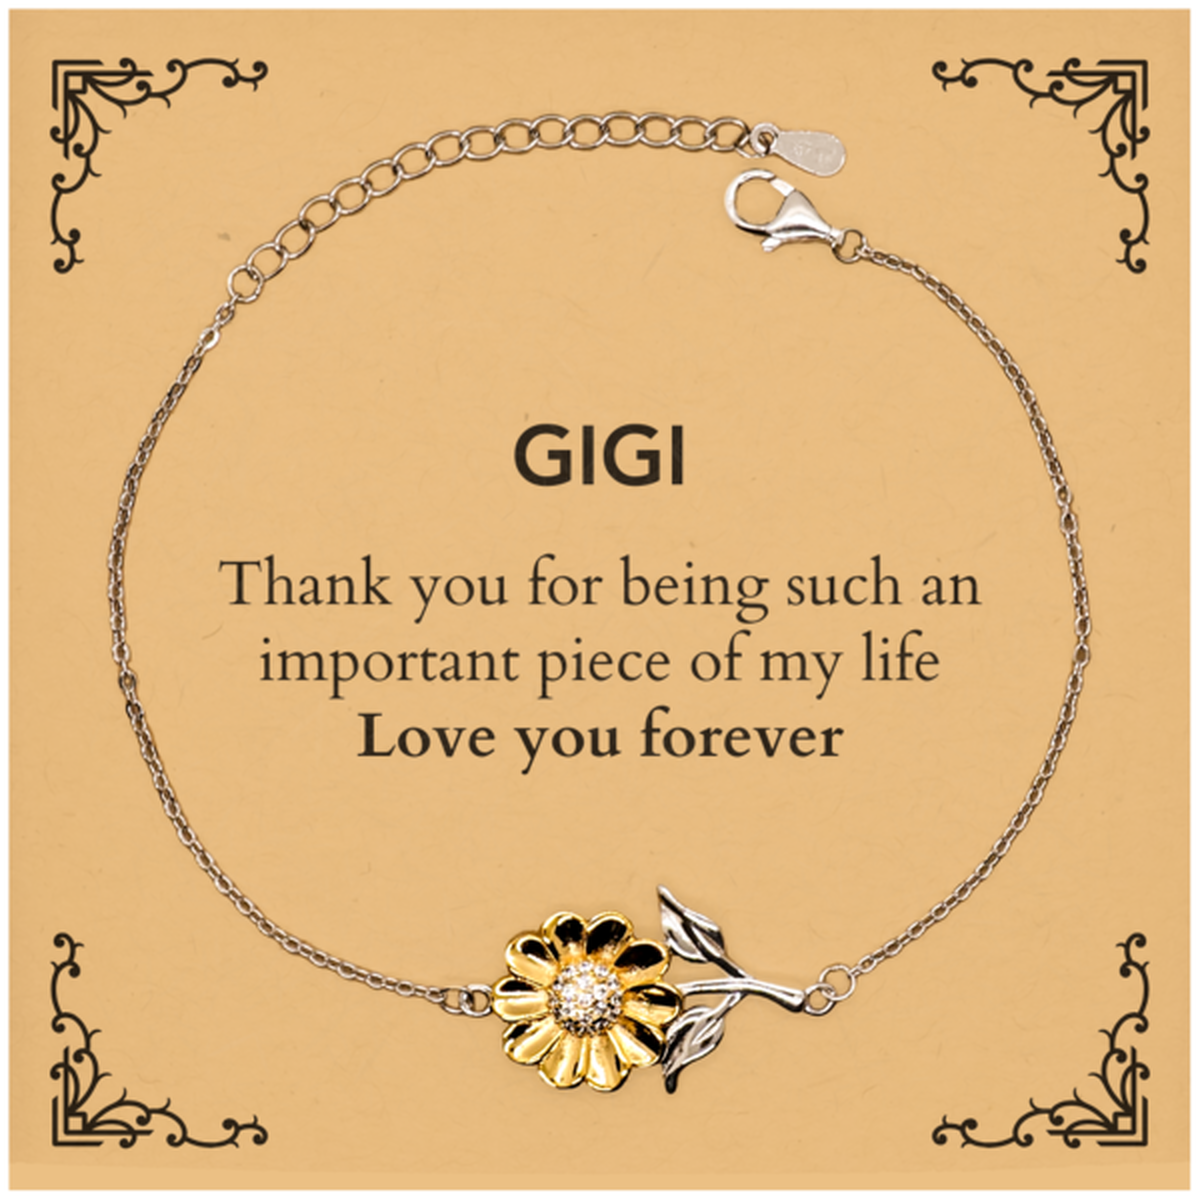 Appropriate Gigi Sunflower Bracelet Epic Birthday Gifts for Gigi Thank you for being such an important piece of my life Gigi Christmas Mothers Fathers Day